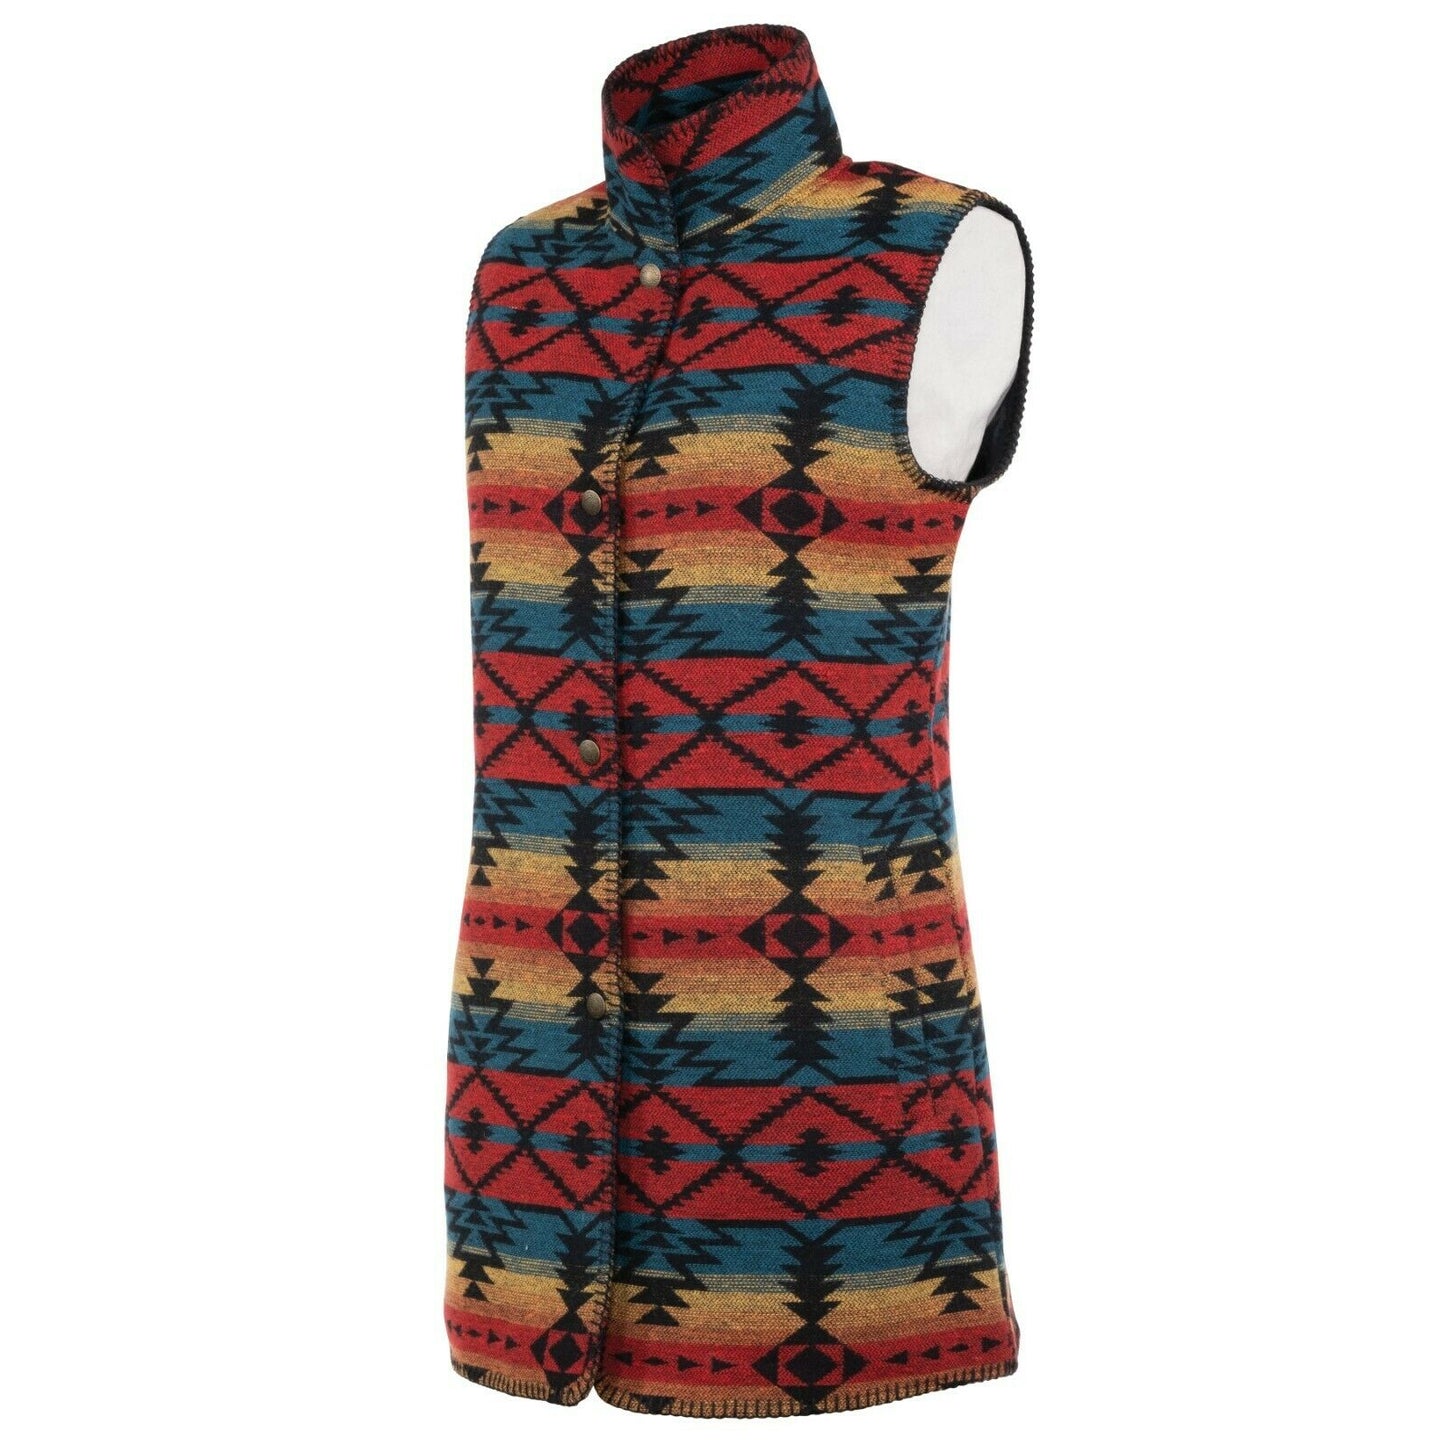 Outback Trading Ladies Stockard Aztec Sunset Vests 29655-SST